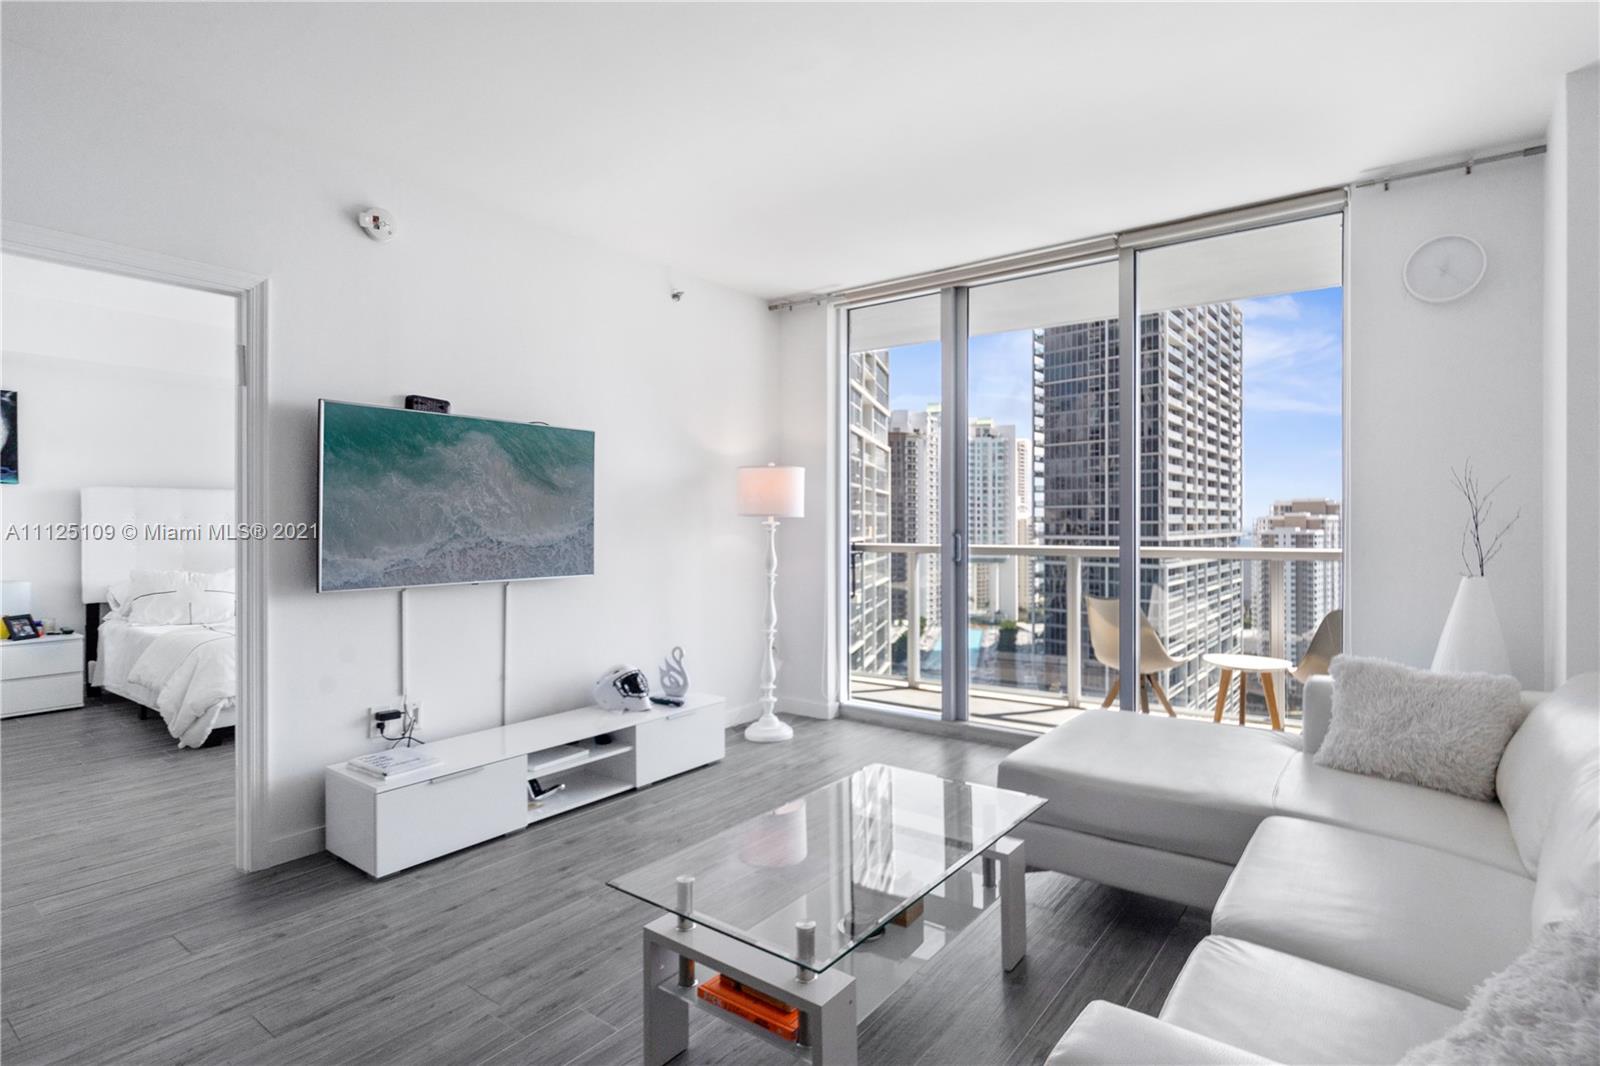 Beautiful and spacious one bedroom apartment in the most sought after "00" line at prestigious 500 Brickell. Amazing views of the Bay, Miami River and Brickell Key. Porcelain wood floors, European kitchen, windows treatments. Building offers top of the line amenities including pools, spa, fitness center, 24 hour concierge, valet, etc. Walking distance to downtown, Brickell city centre, restaurants, shops and movie theater.